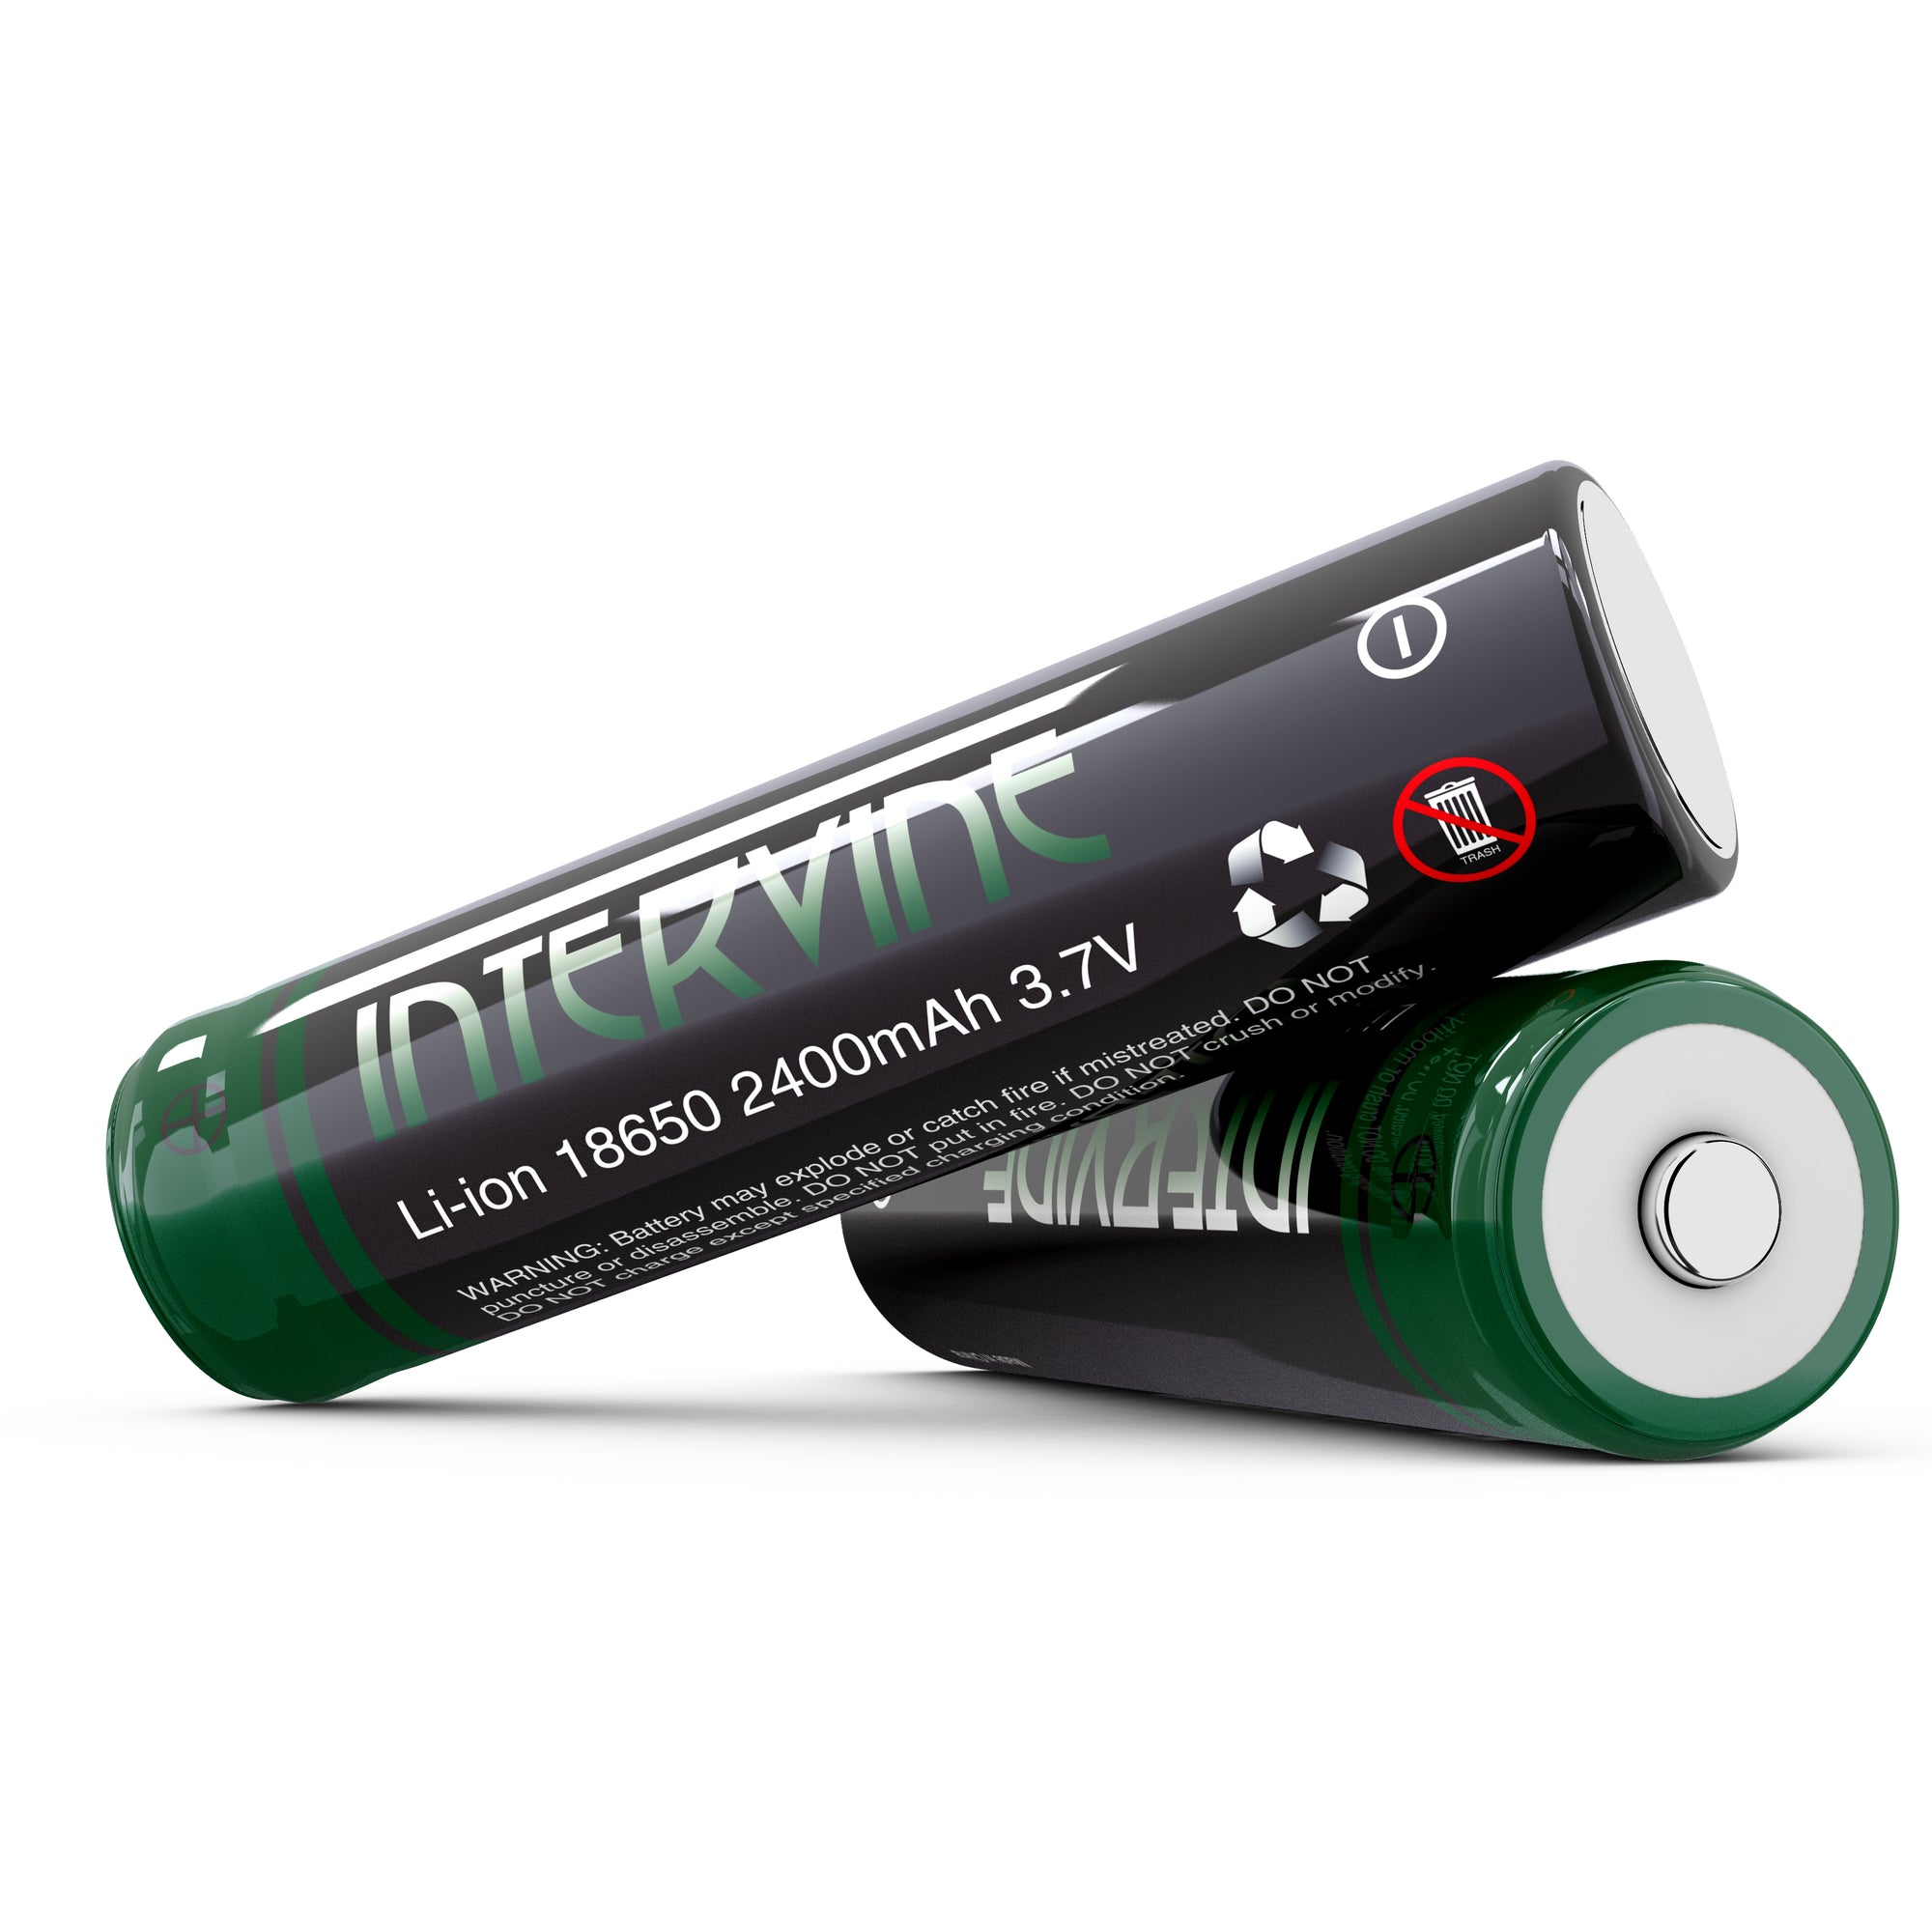 18650 LITHIUM ION RECHARGEABLE BATTERIES (2-PACK) – ILLUMAGEAR